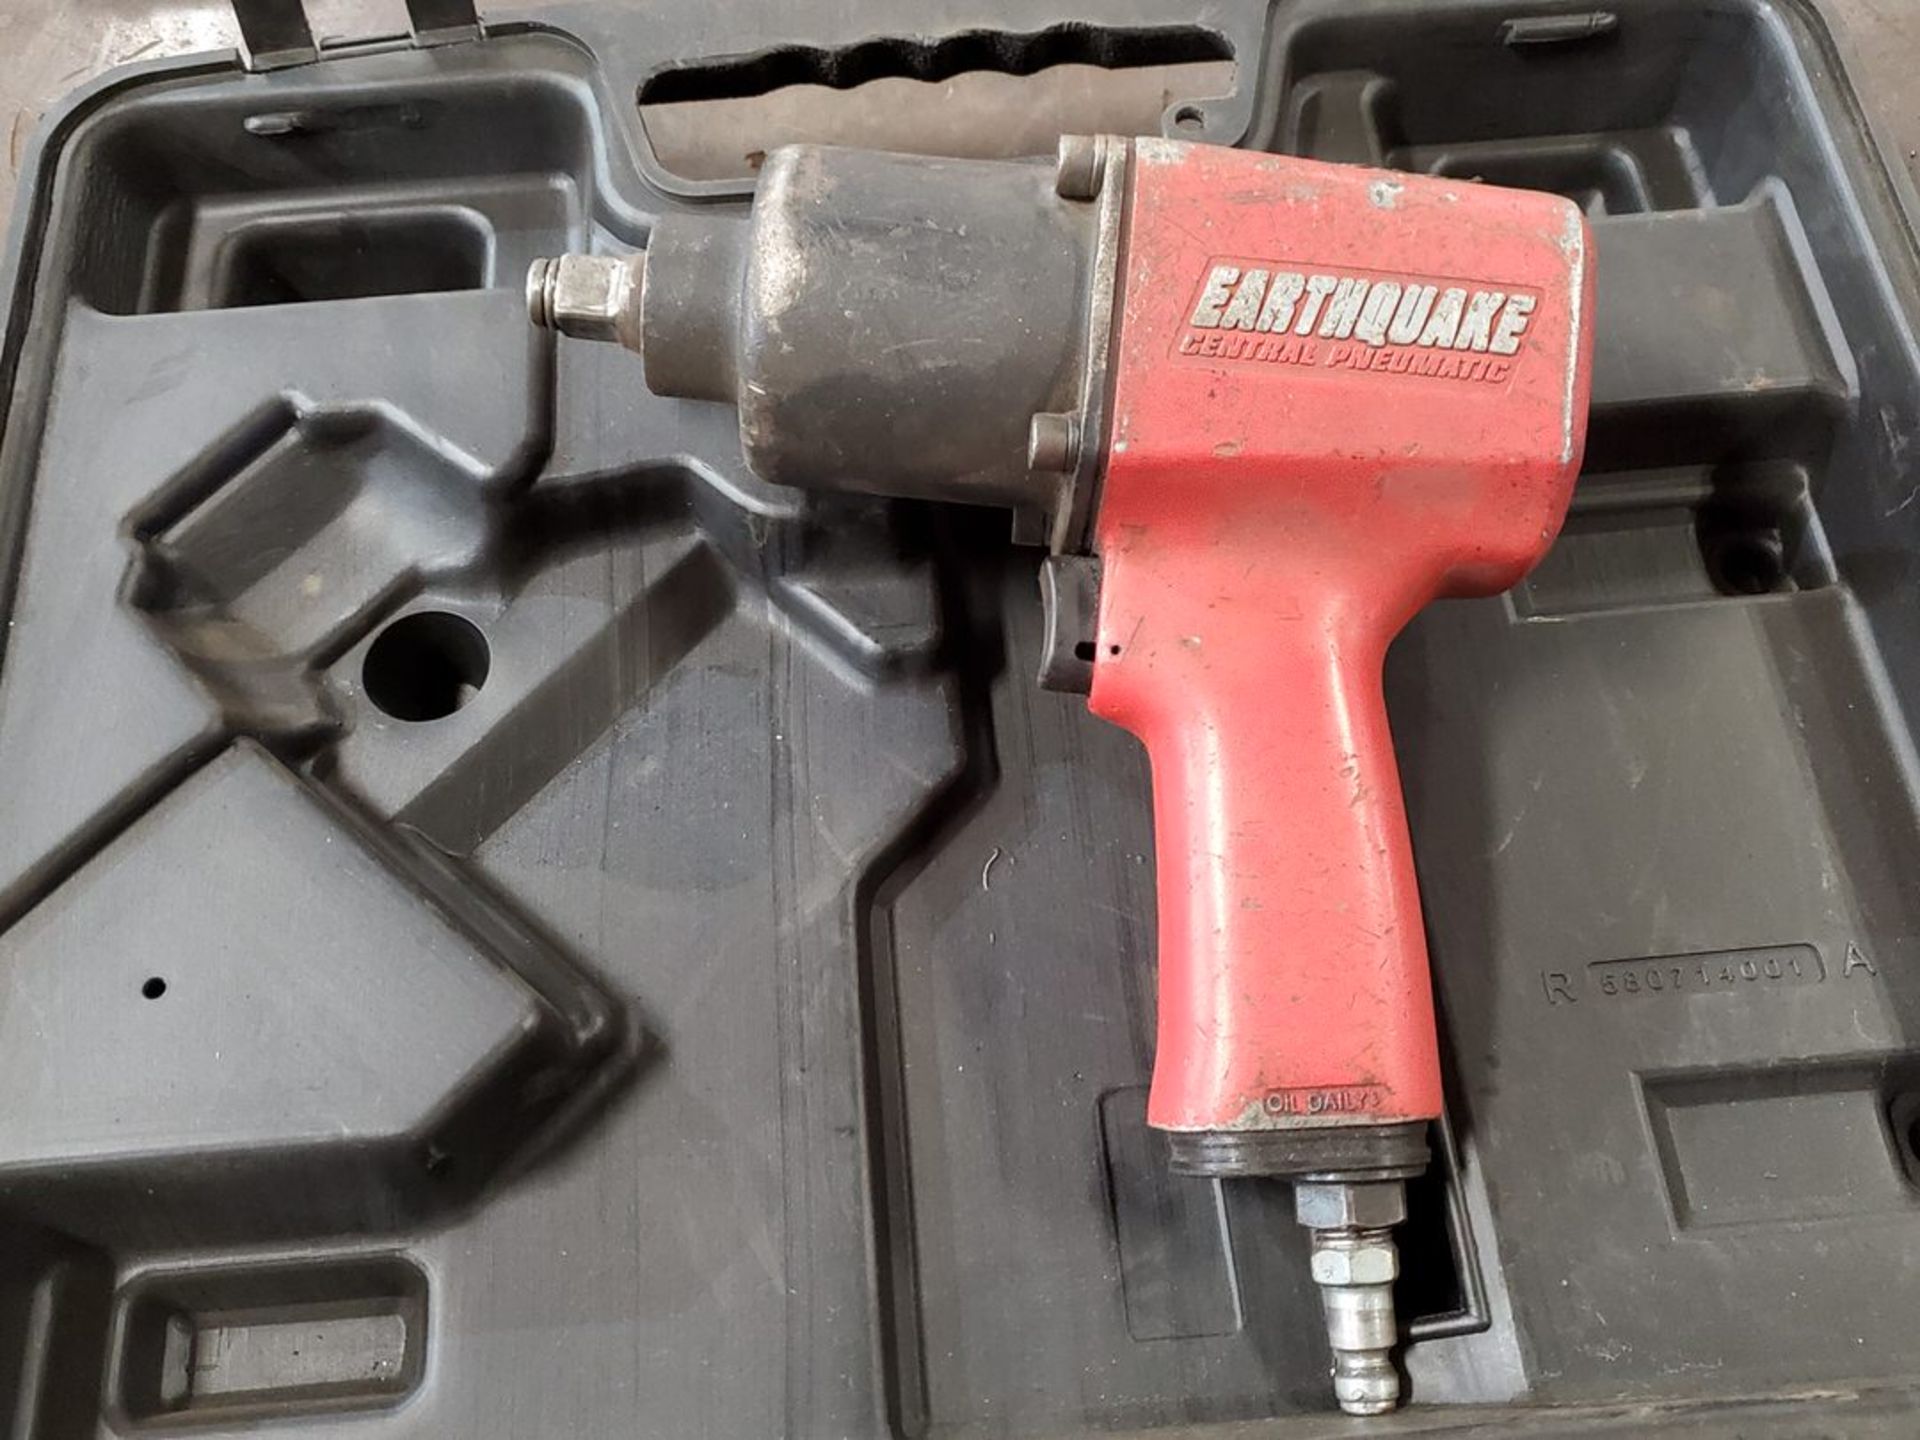 Craftsman 1/2" Impact Wrench 120V, 7.5A, 60HZ; W/ Earthquake-Mfg Impact Wrench - Image 4 of 4